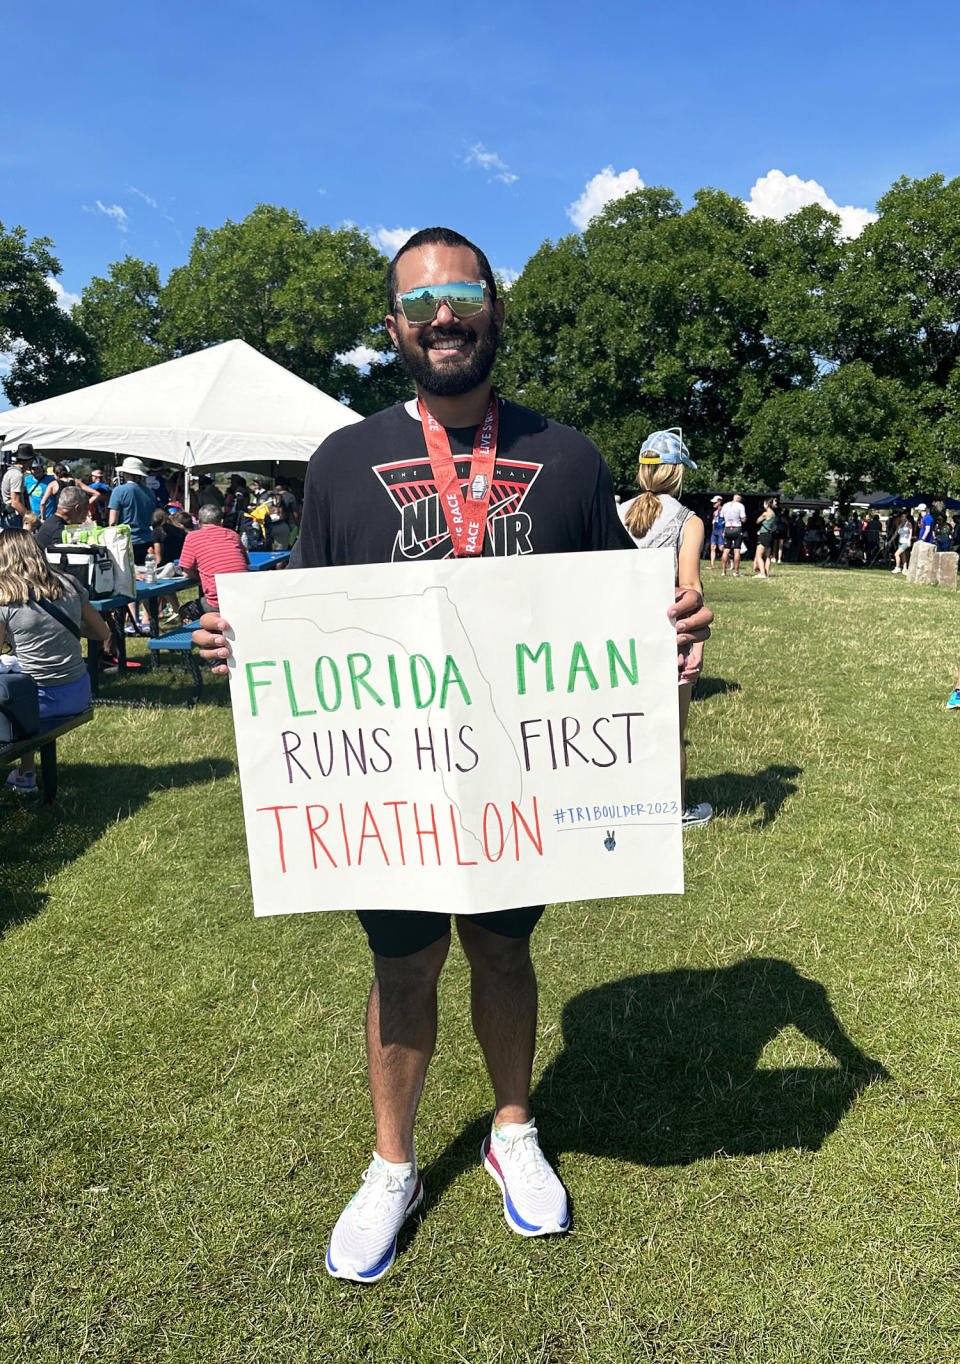 Lopez achieved a lofty goal: completing a triathlon that consisted of an 800-meter swim, a 17-mile bike ride and a 5k run. (Courtesy Santiago Lopez)